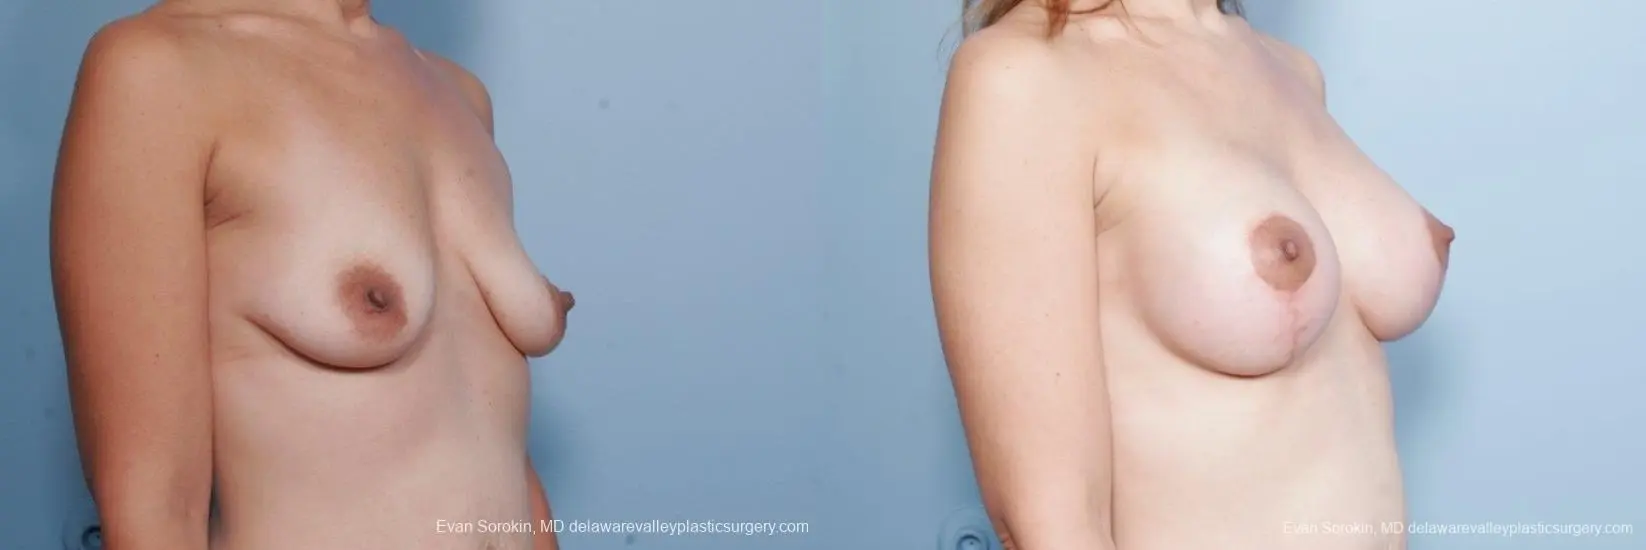 Philadelphia Breast Lift and Augmentation 8685 - Before and After 2